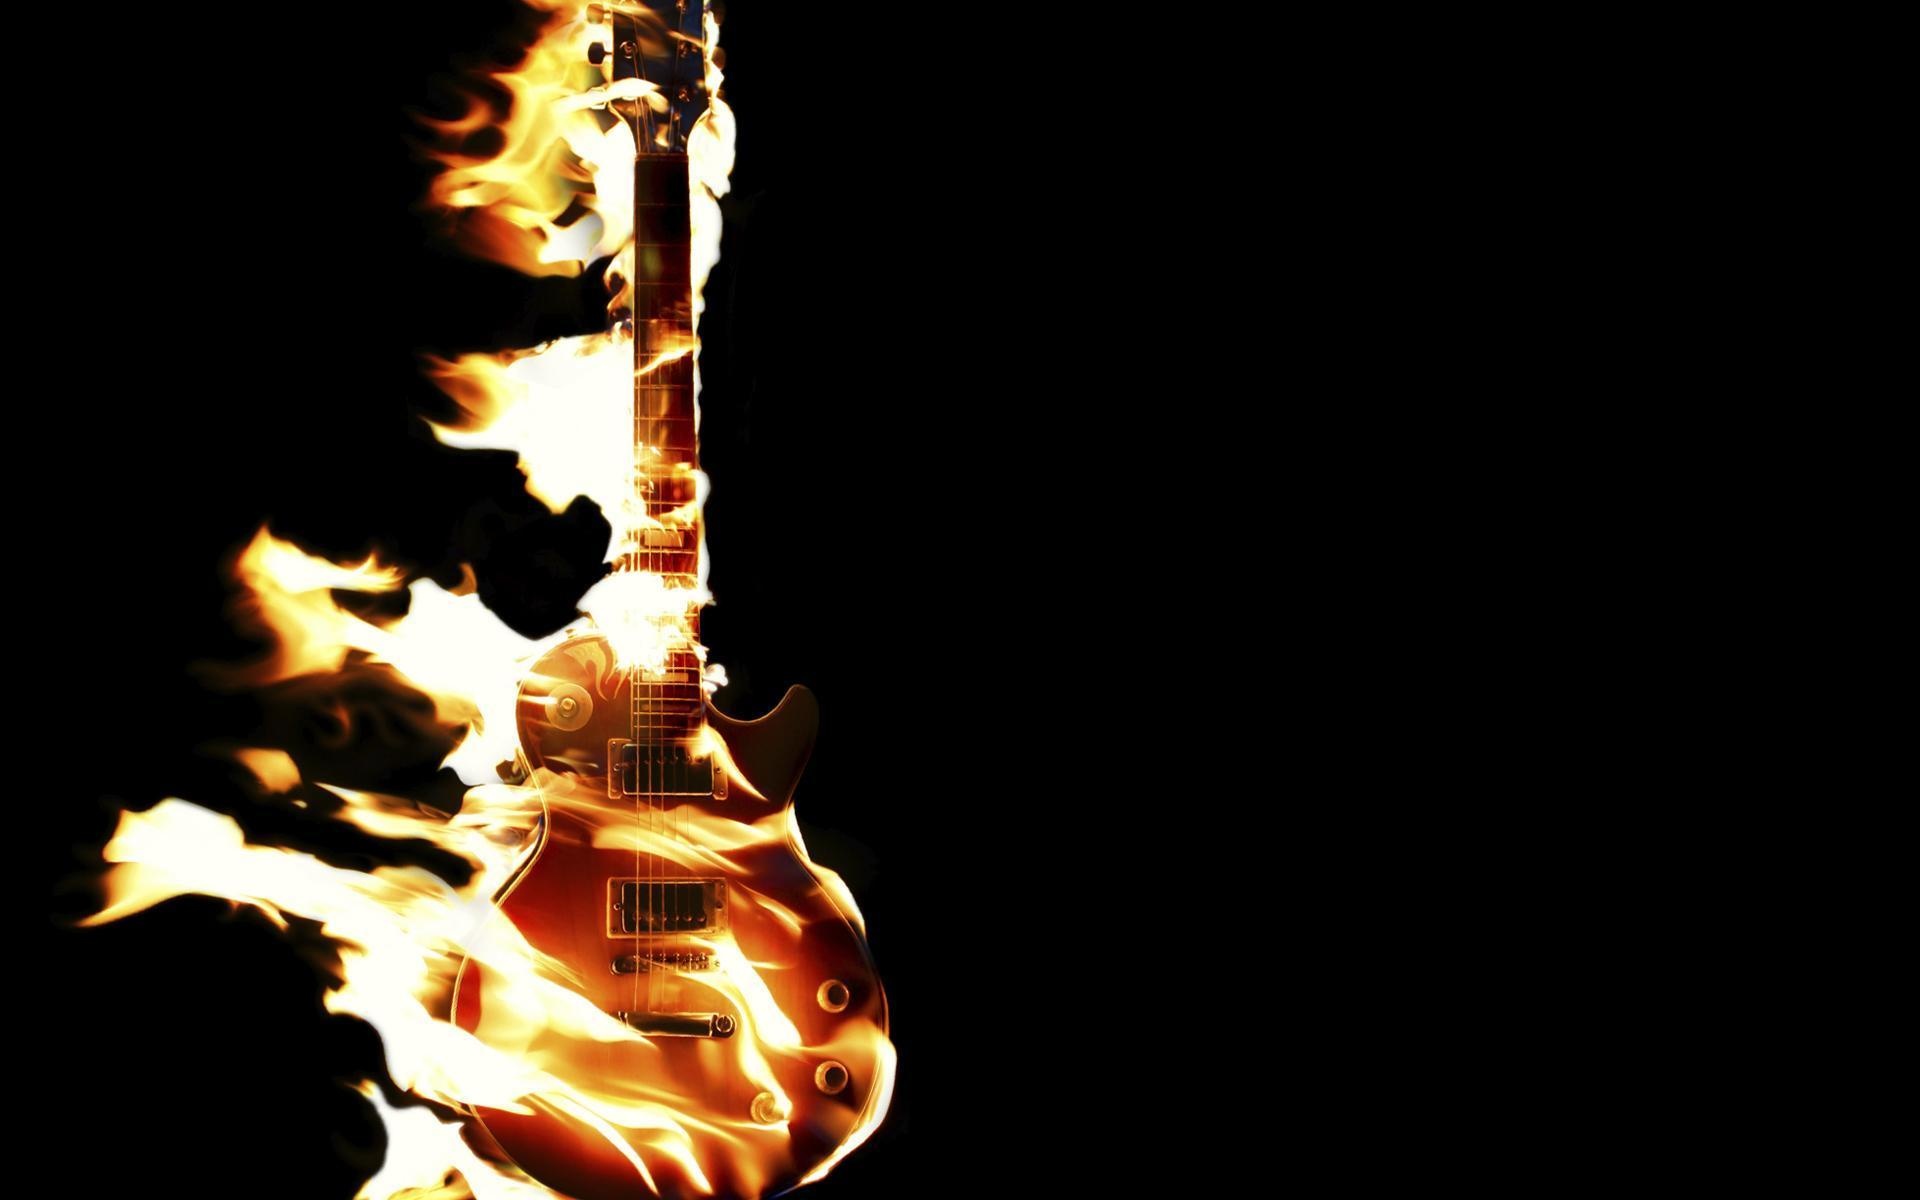 Guitar on fire, Blazing rock melodies, Burning passion, Musical inferno, 1920x1200 HD Desktop